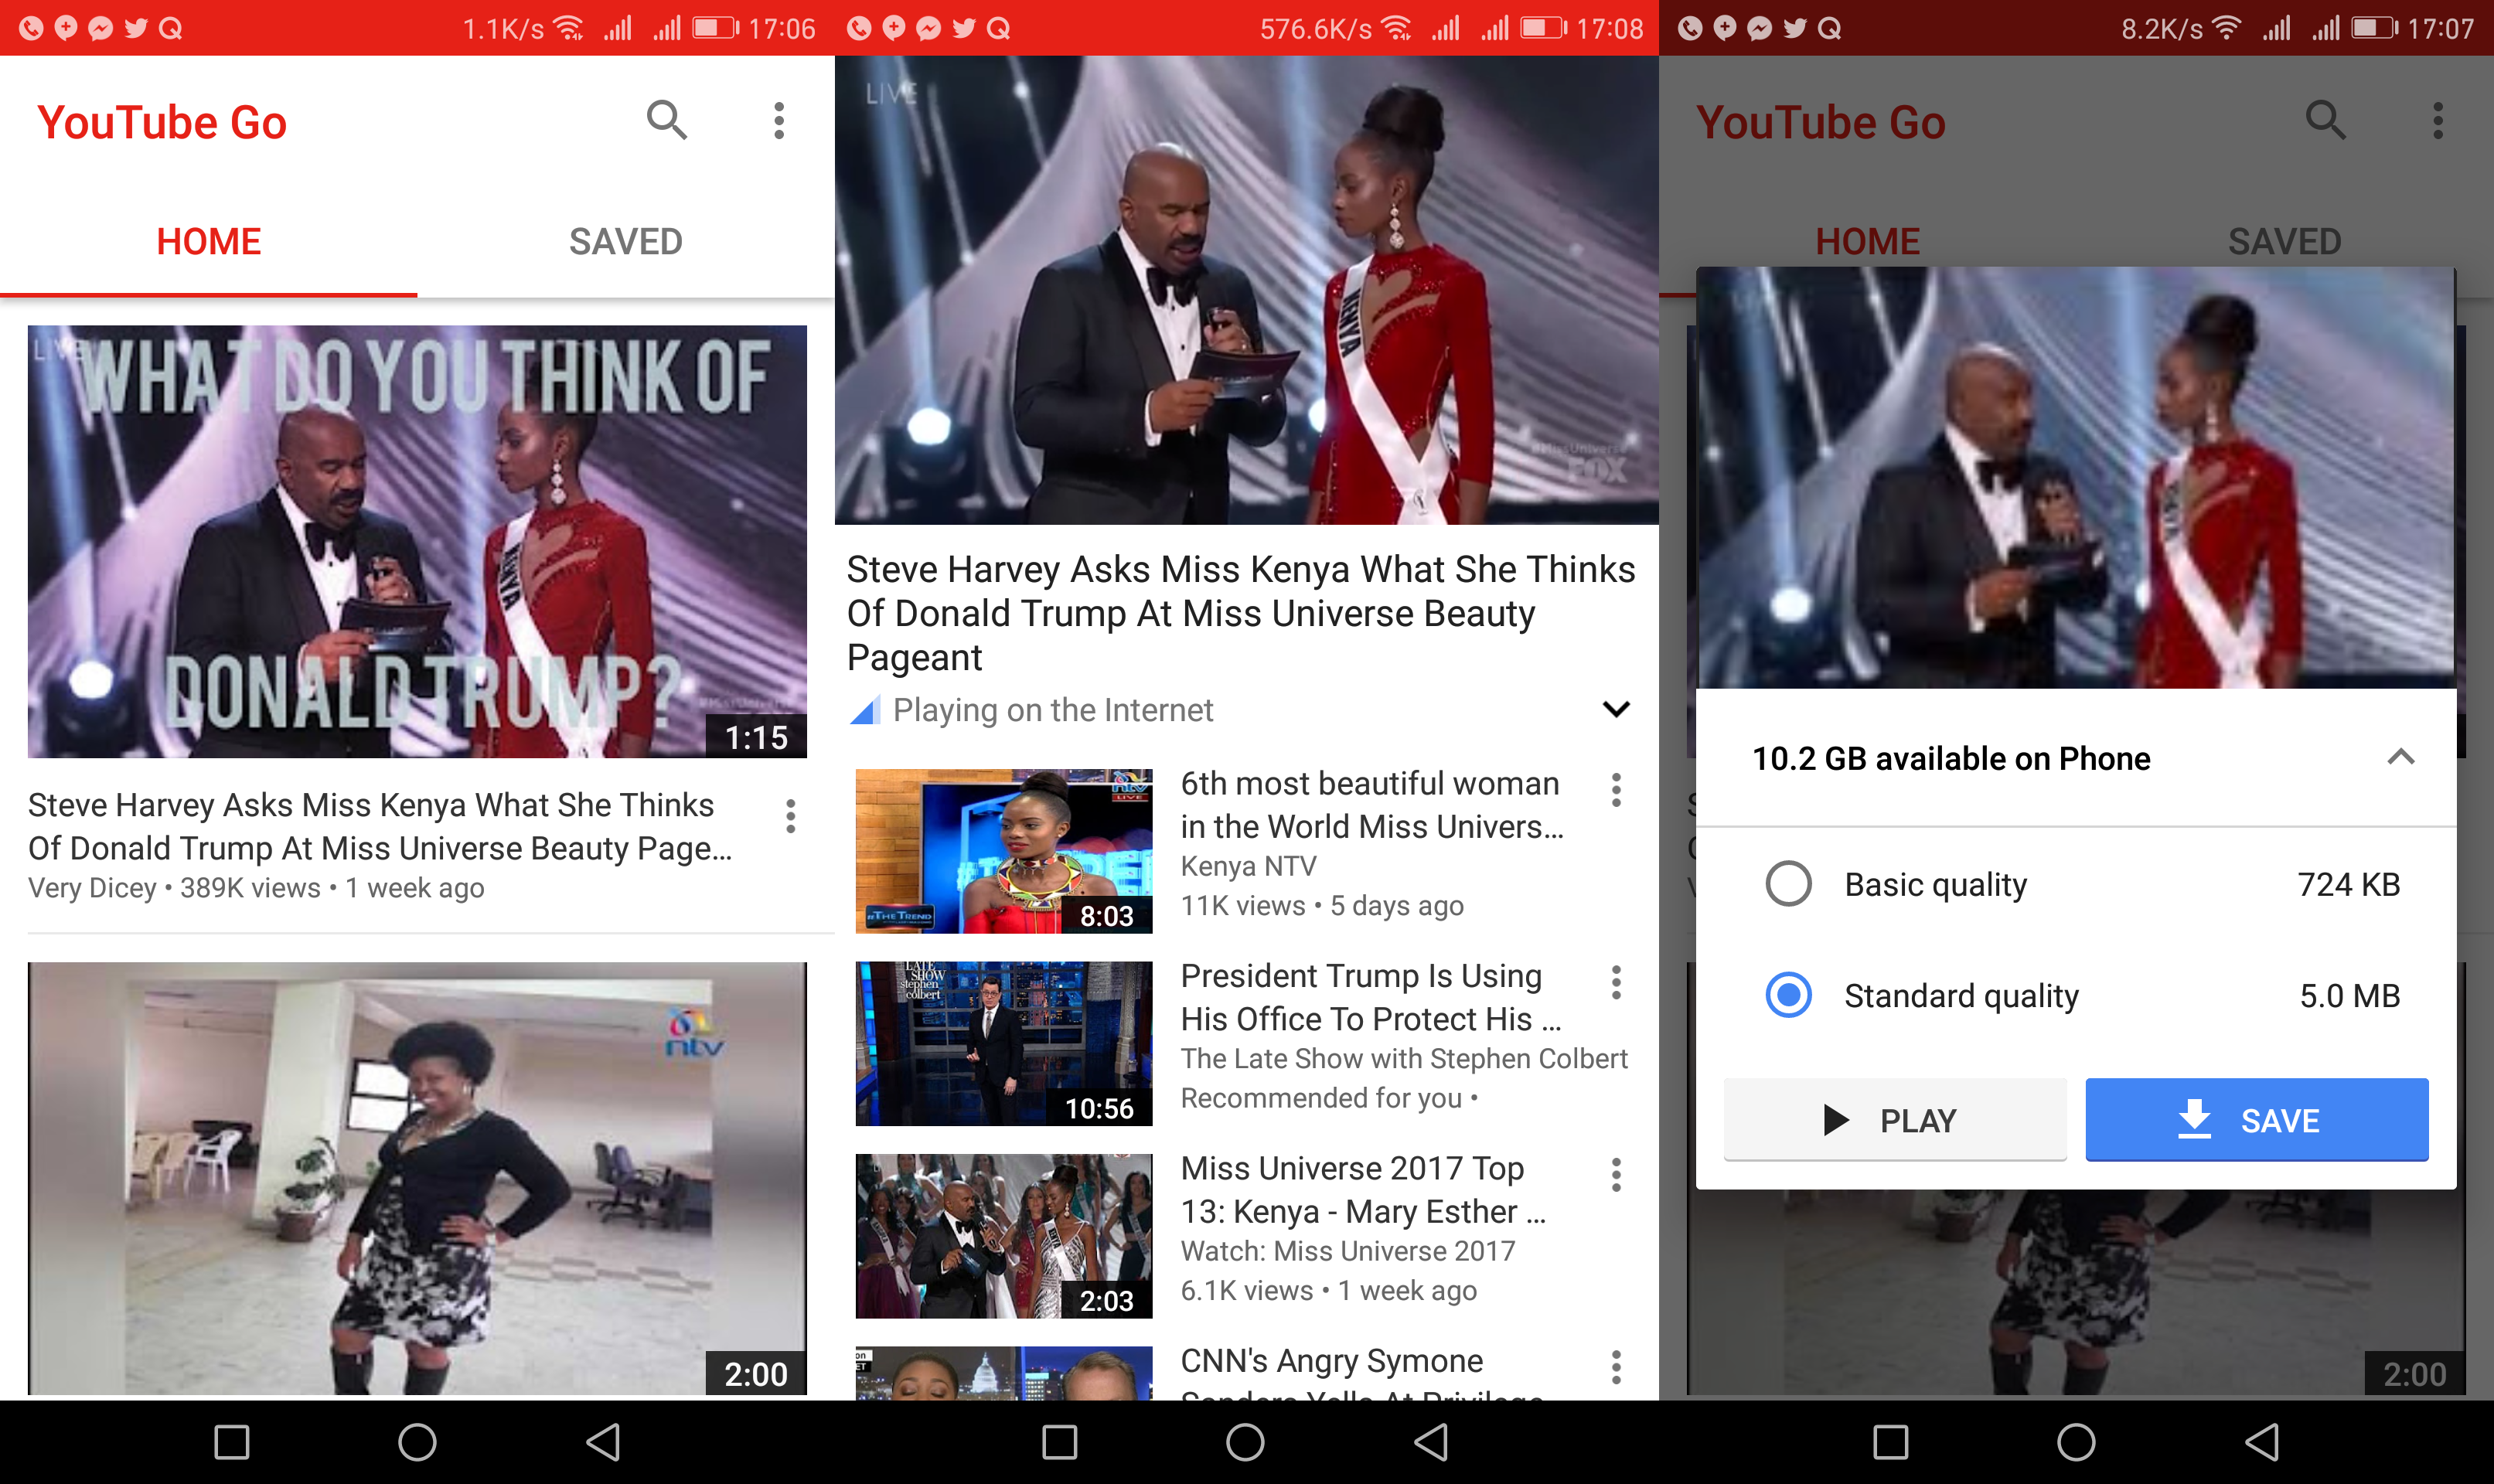 YouTube Go app for Android screen grabs